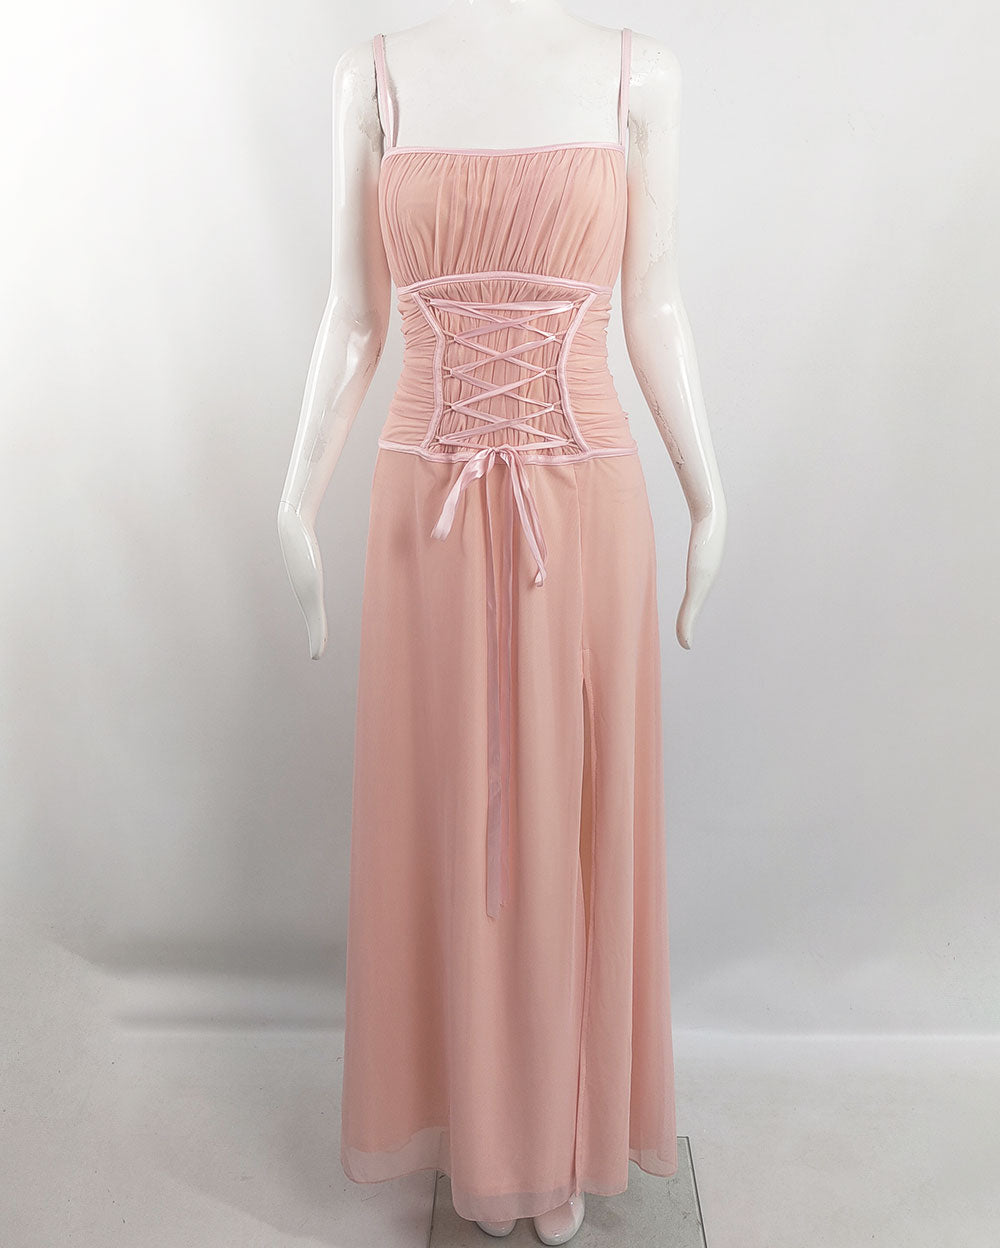 An image of a vintage 1990s tadashi shoji dress in a pink mesh fabric with a corset ribbon detail.